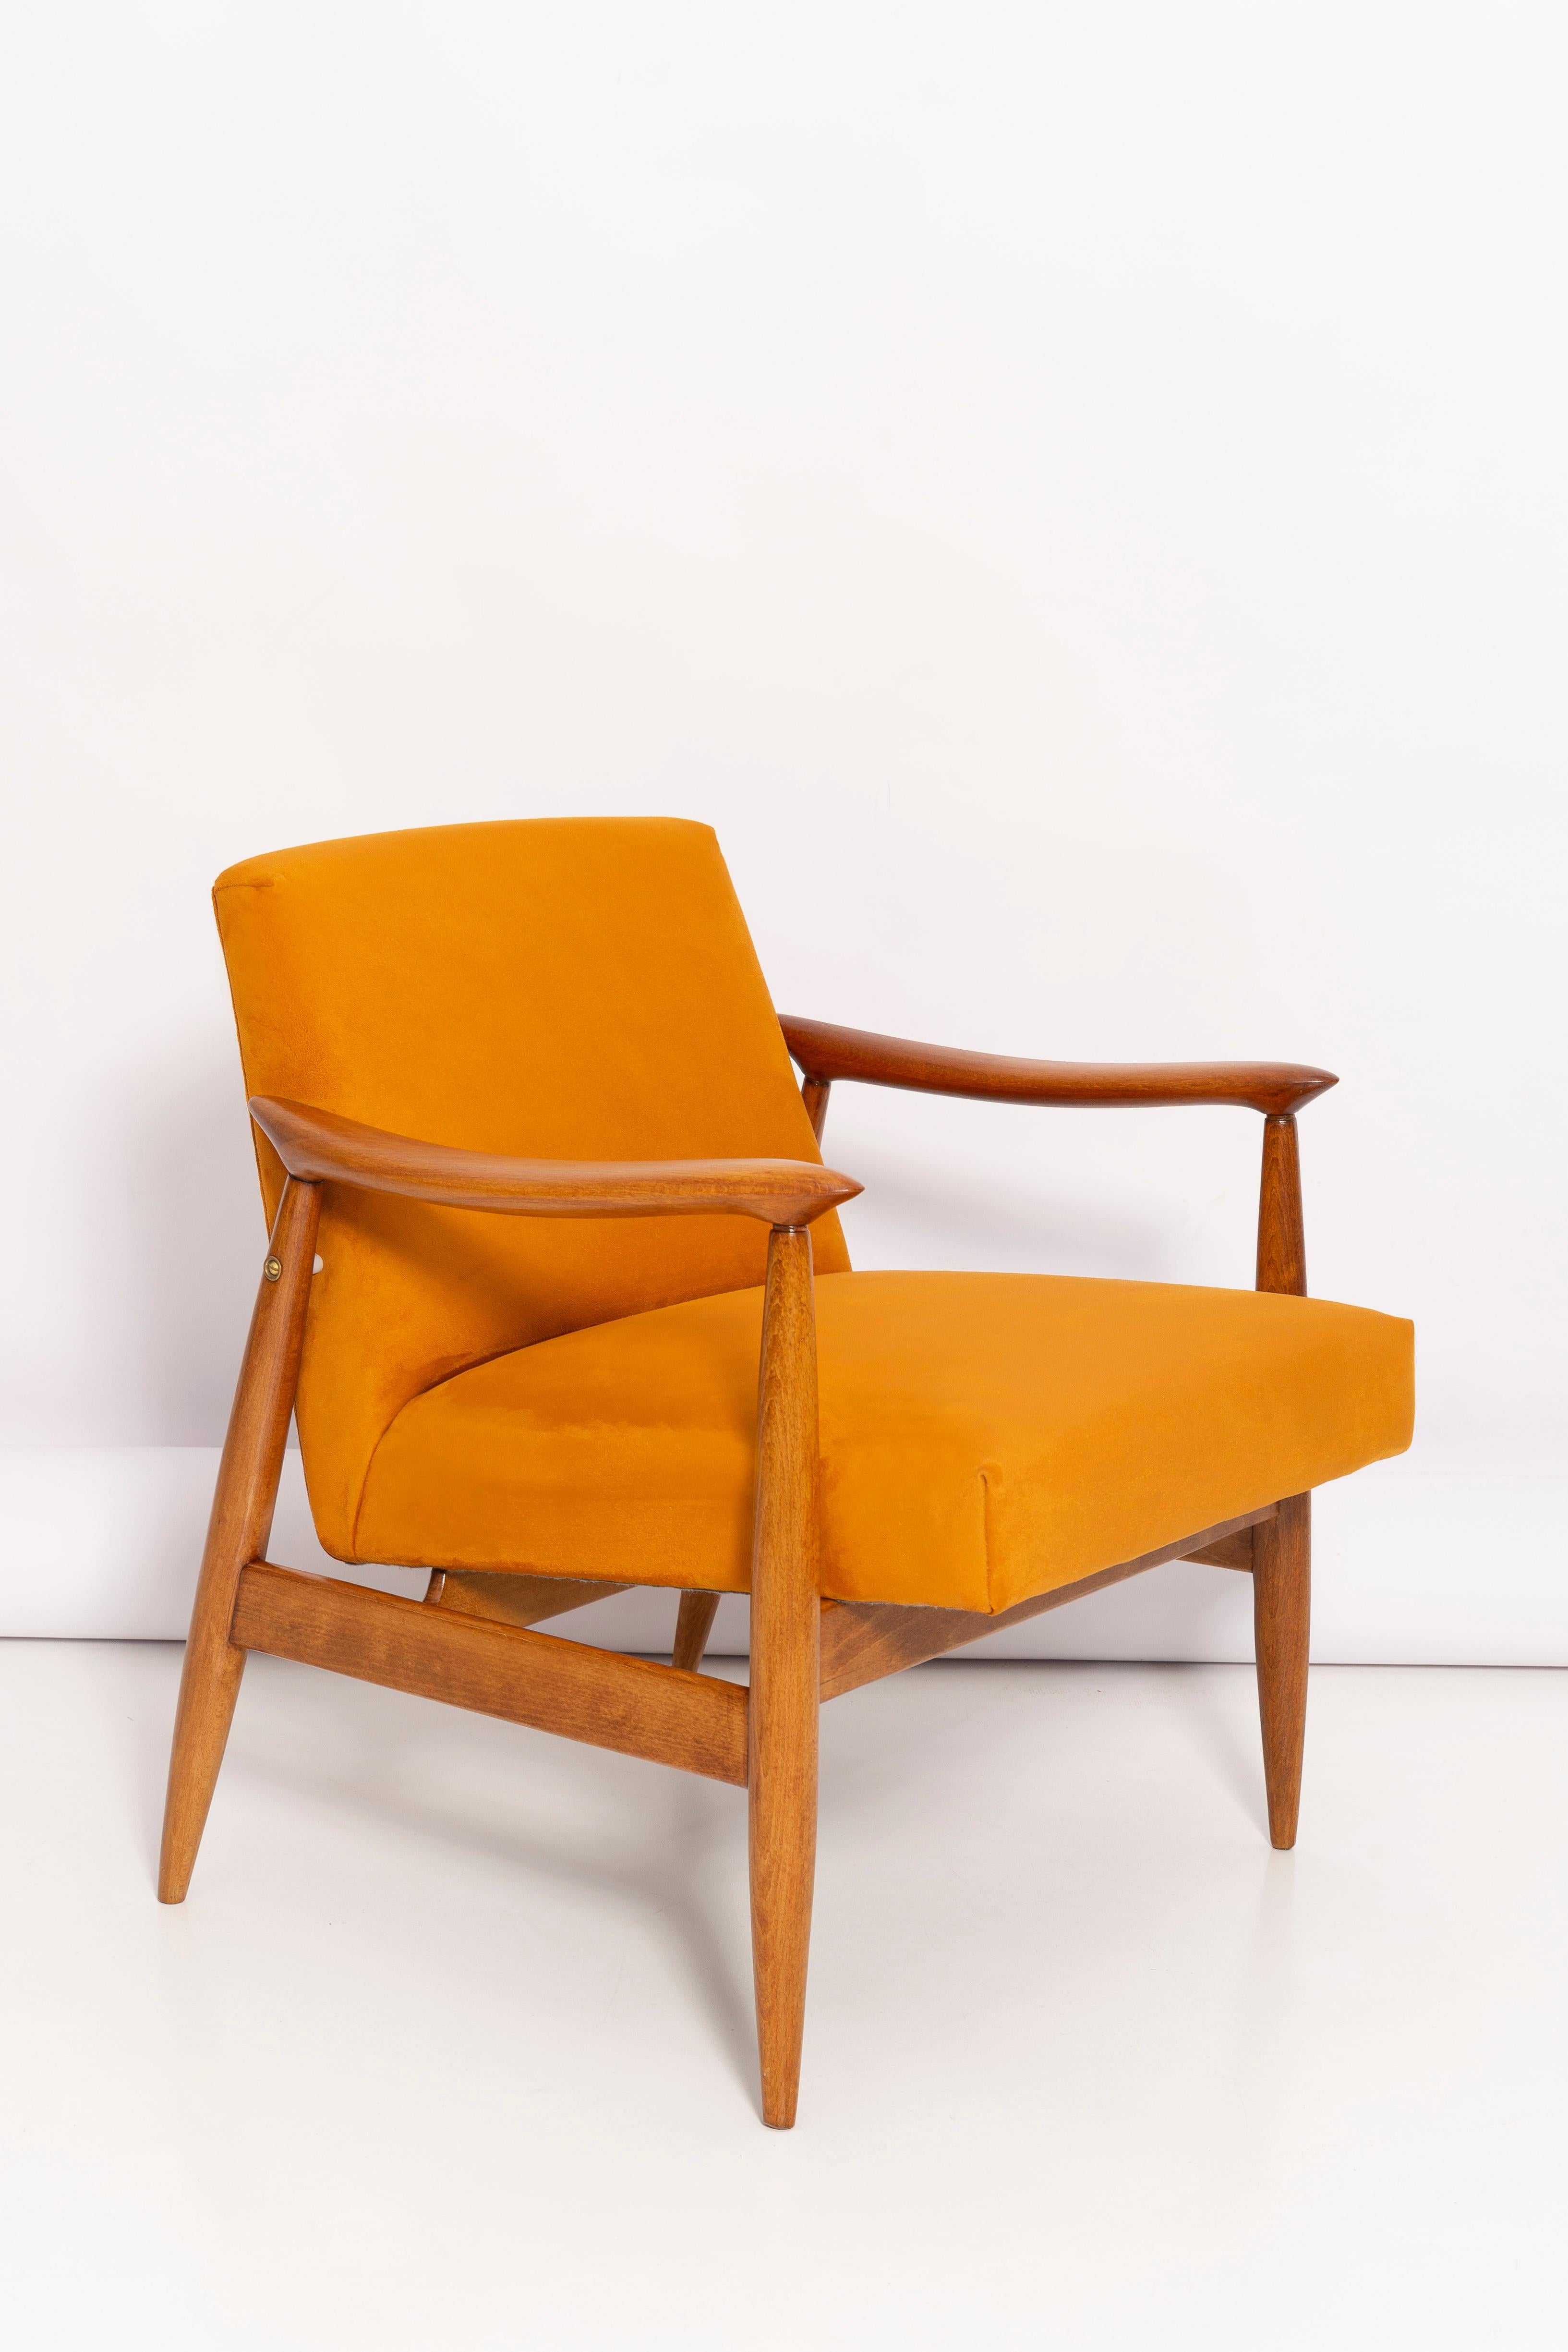 The GFM armchair is an icon of the Polish design of the PRL period.

The famous armchair was designed in 1962 by the Polish interior designer and furniture designer Juliusz Kedziorek. Produced in the Lower Silesian Furniture Factory in